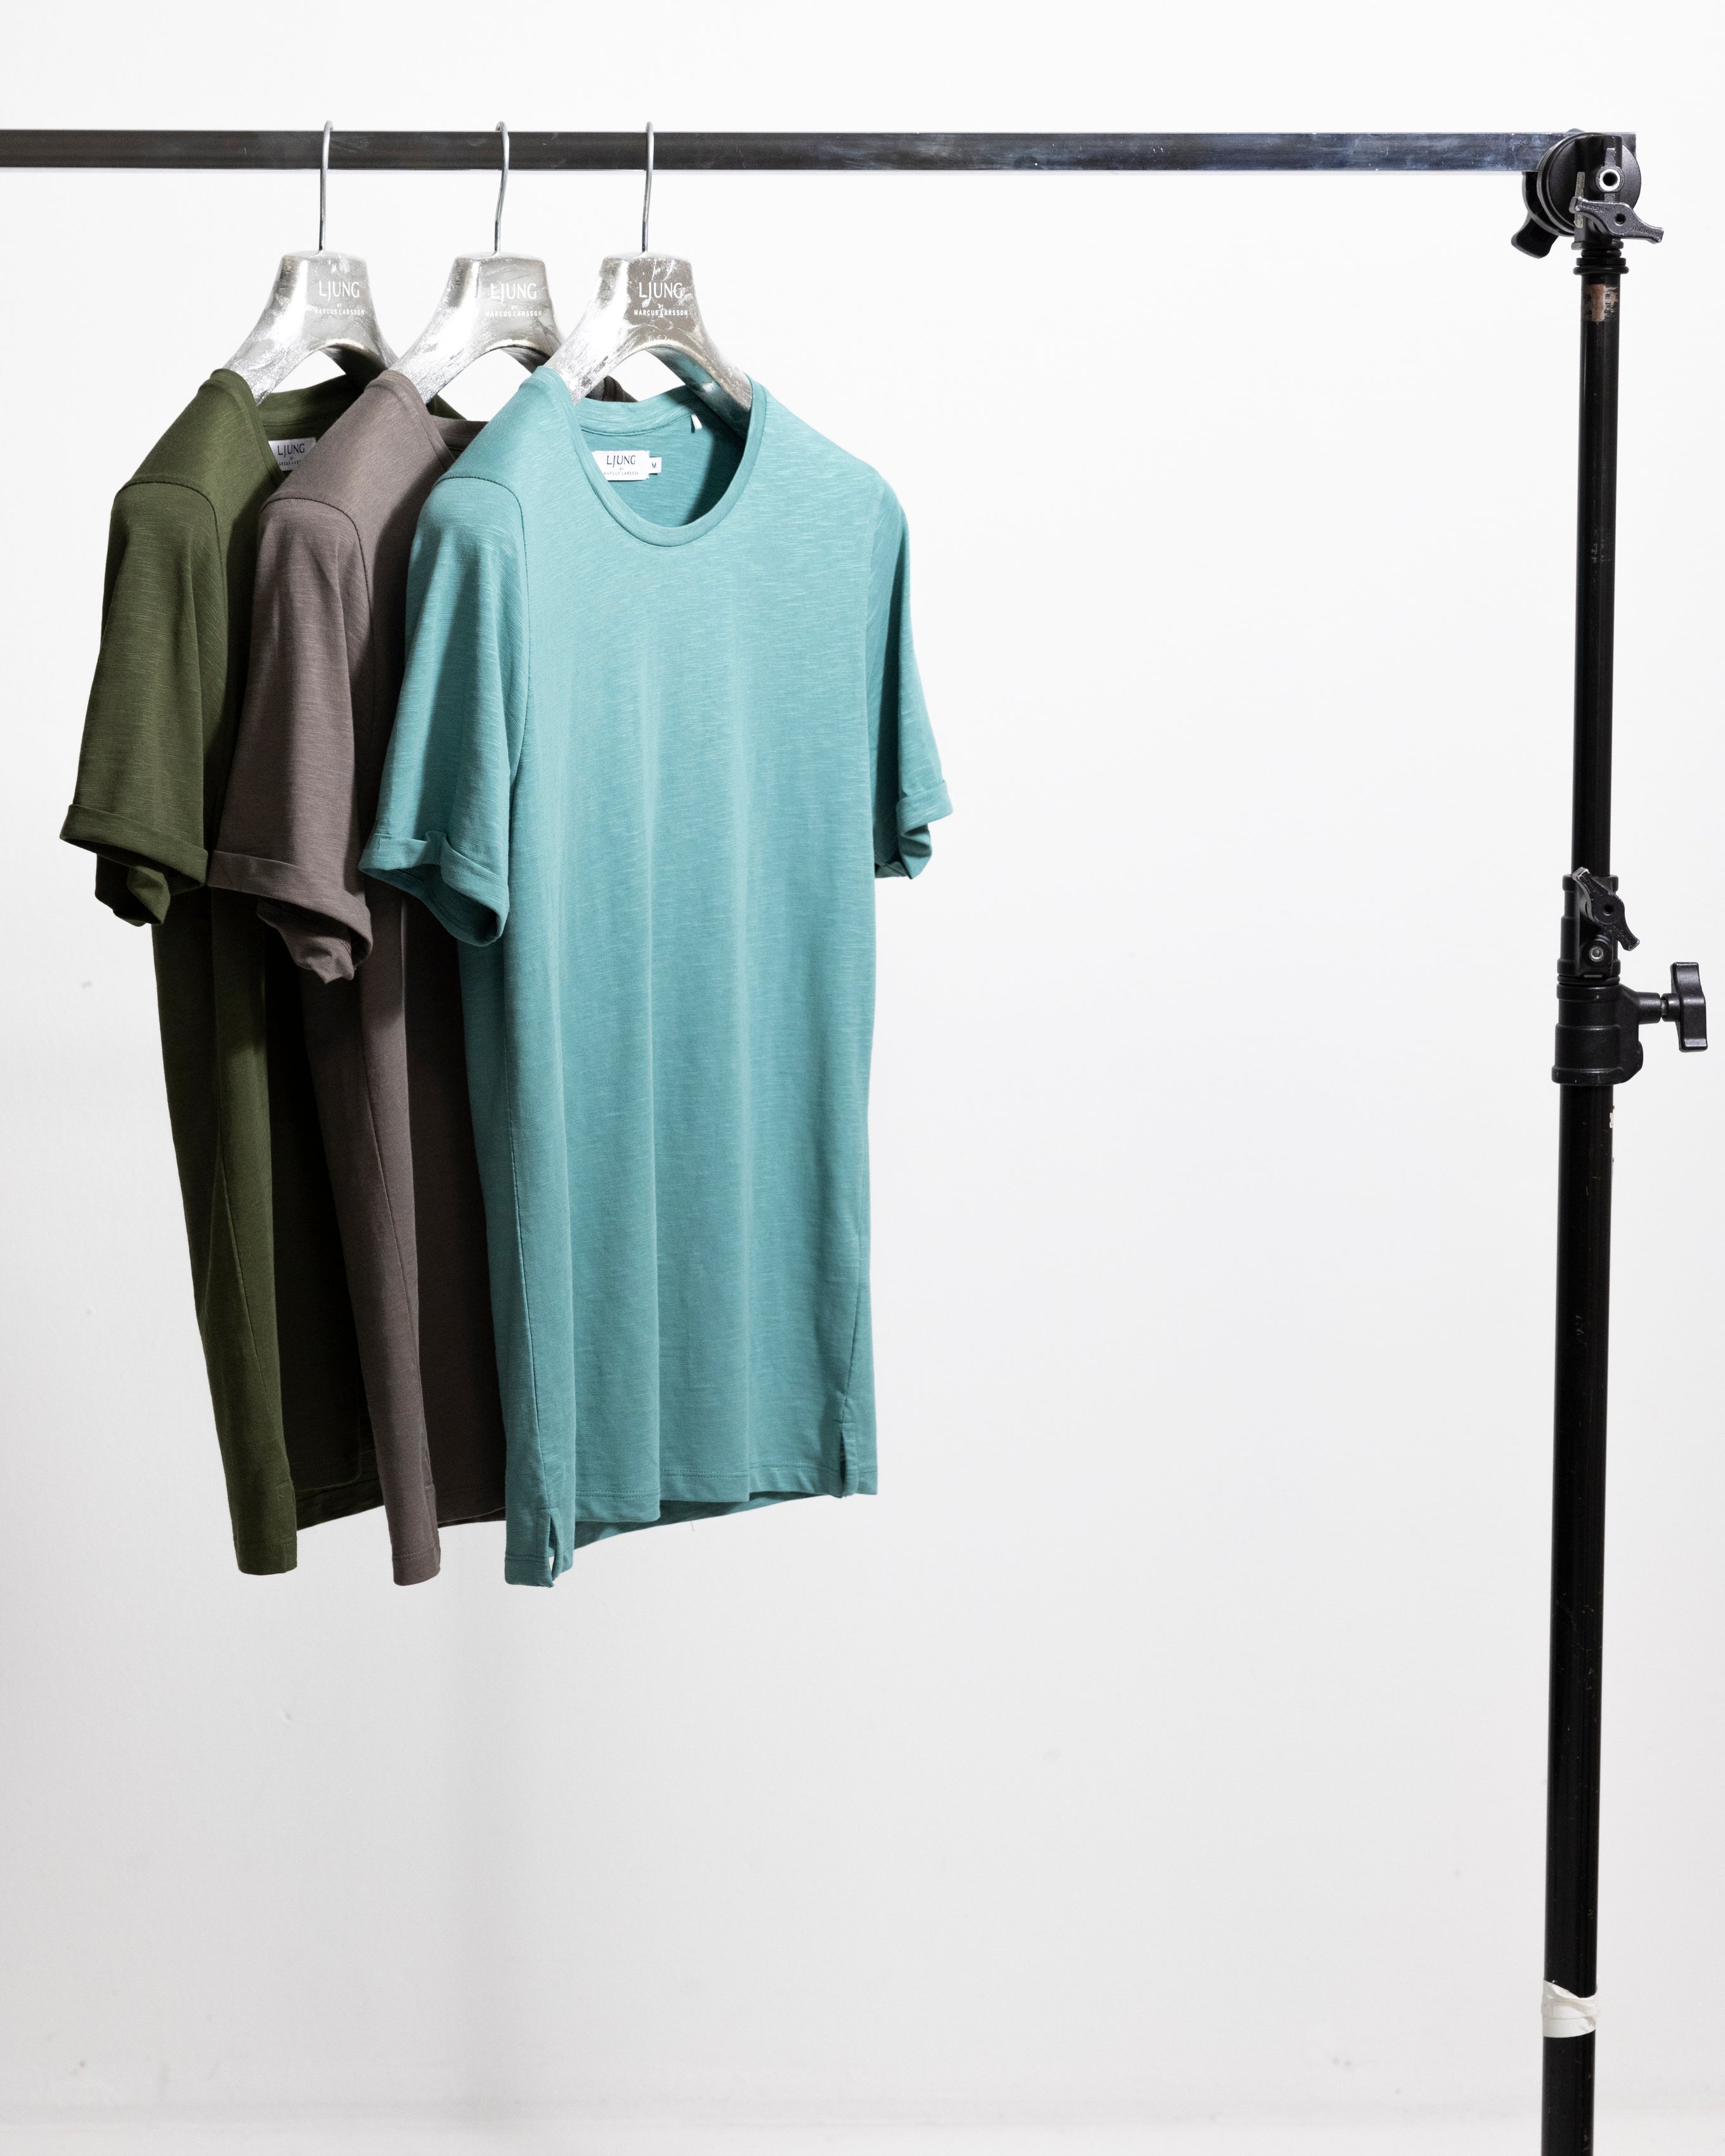 Core Tee 3 Pack - Leaf Green/ Mud Green/ Deep Sea-Ljung by Marcus Larsson